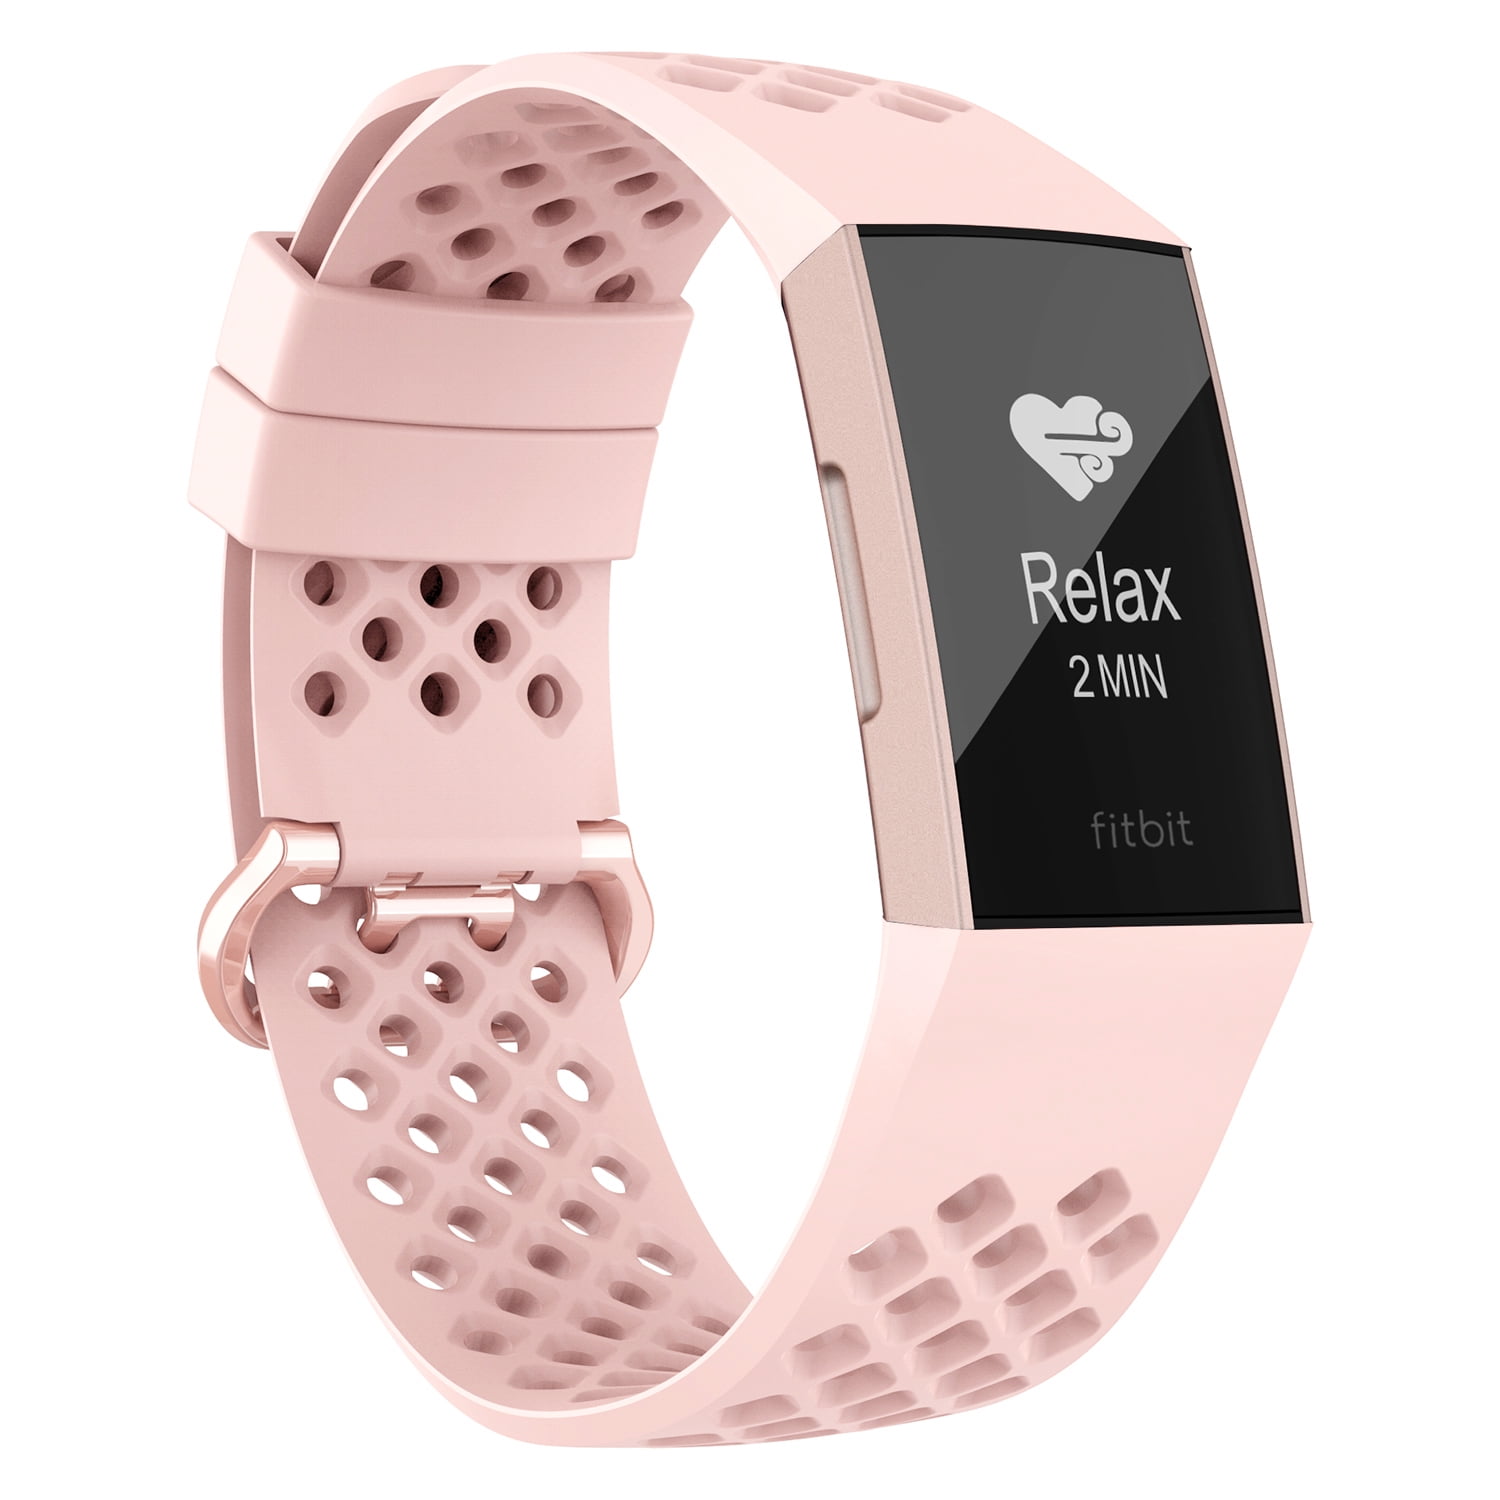 Seminarie een Mentor Adepoy Compatible with Fitbit Charge 4 Bands/Fitbit Charge 3 Bands for  Women Men, Breathable with Air Holes Replacement Wristbands for Fitbit  Charge 3 SE LightPink Small size for 5.5" - 7.5" wrist - Walmart.com